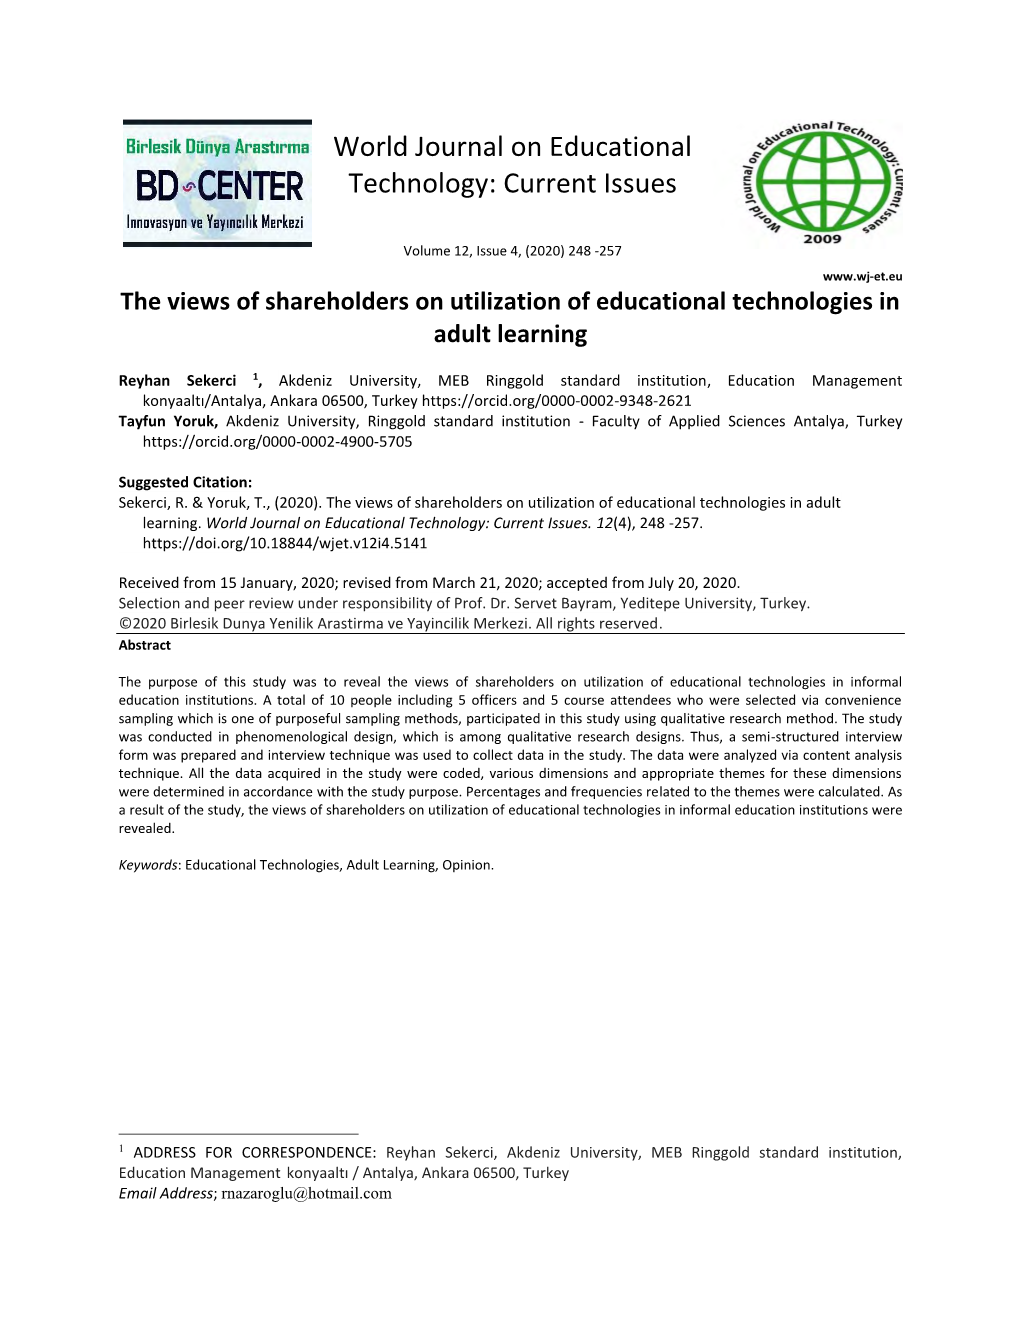 World Journal on Educational Technology: Current Issues